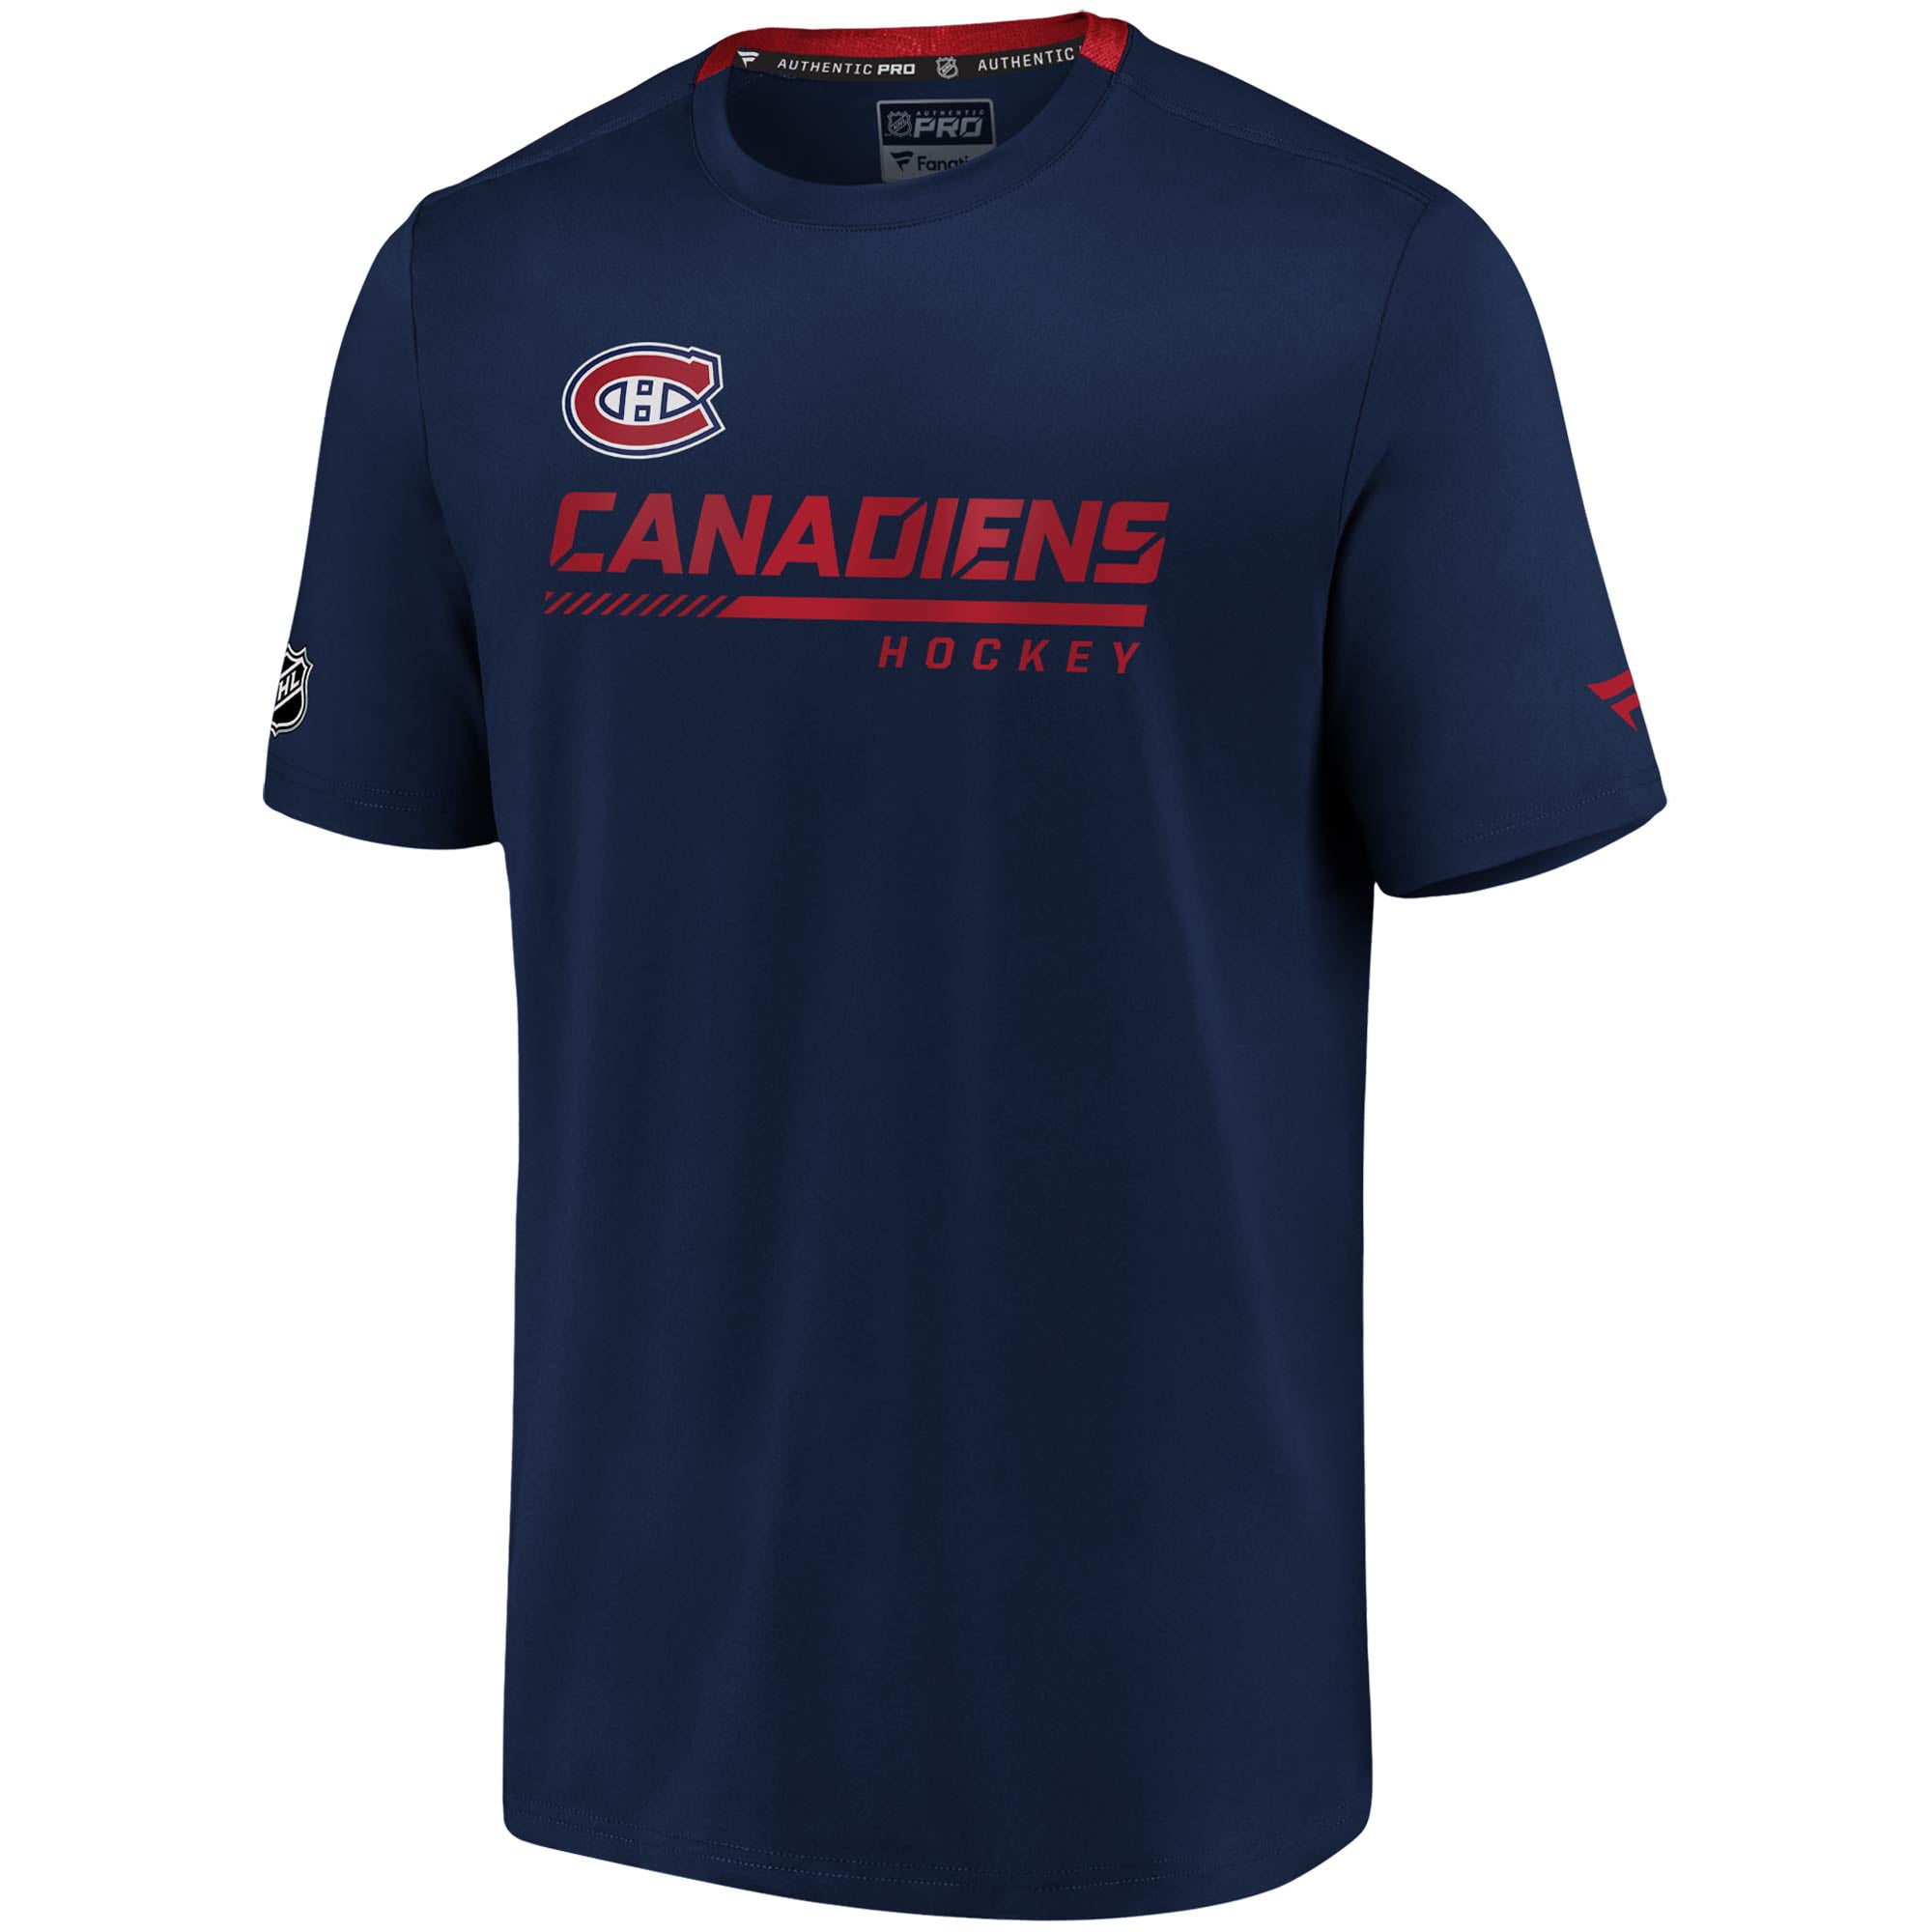 Montreal Canadiens authentic jersey